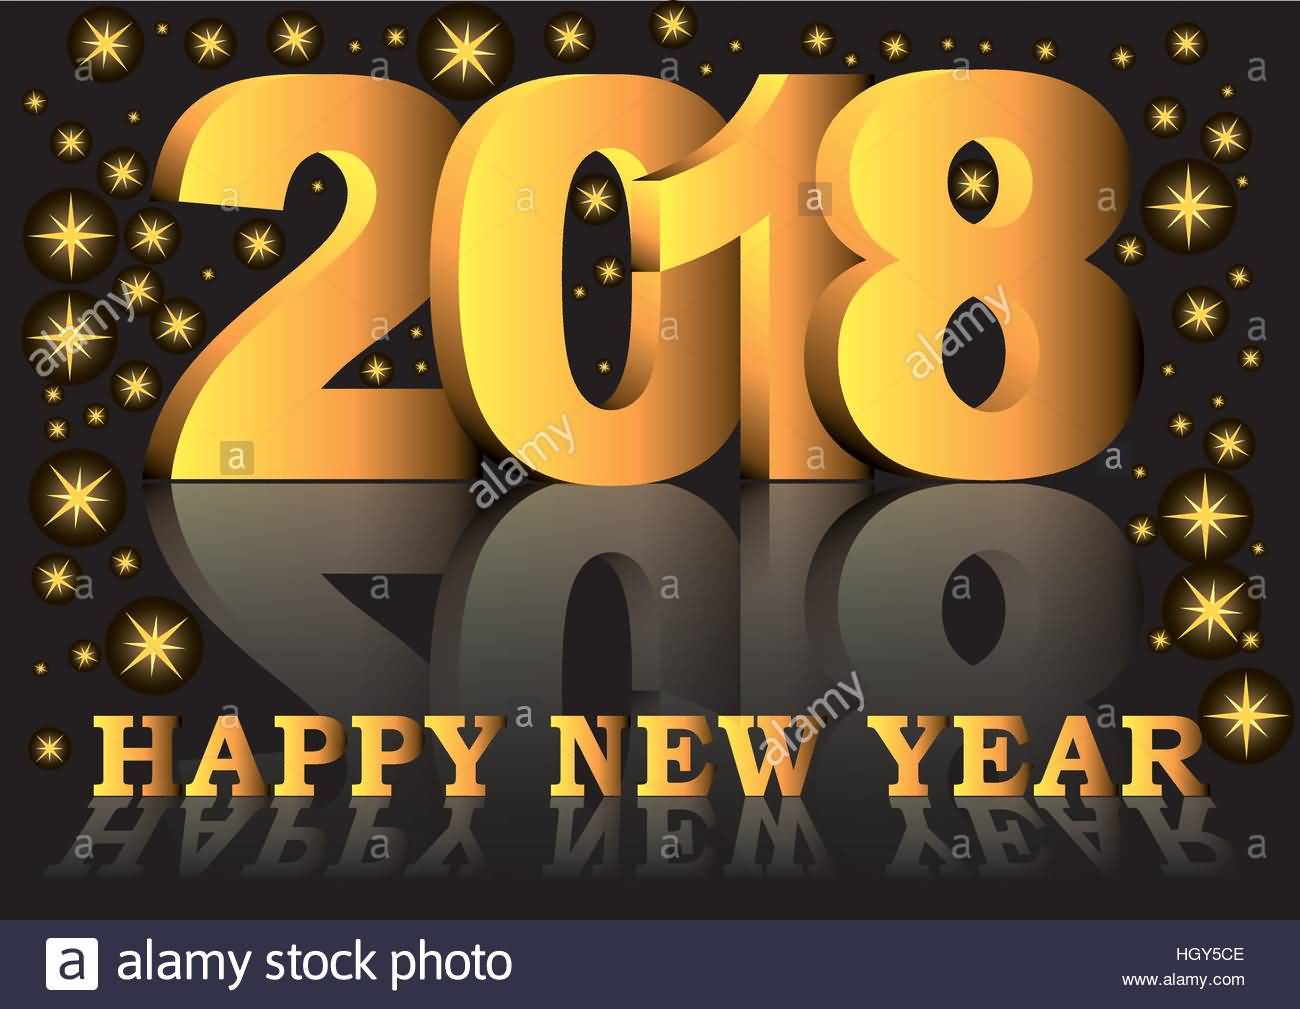 New Year 2018 Cards Wishes Image Picture Photo Wallpaper Greetings 07